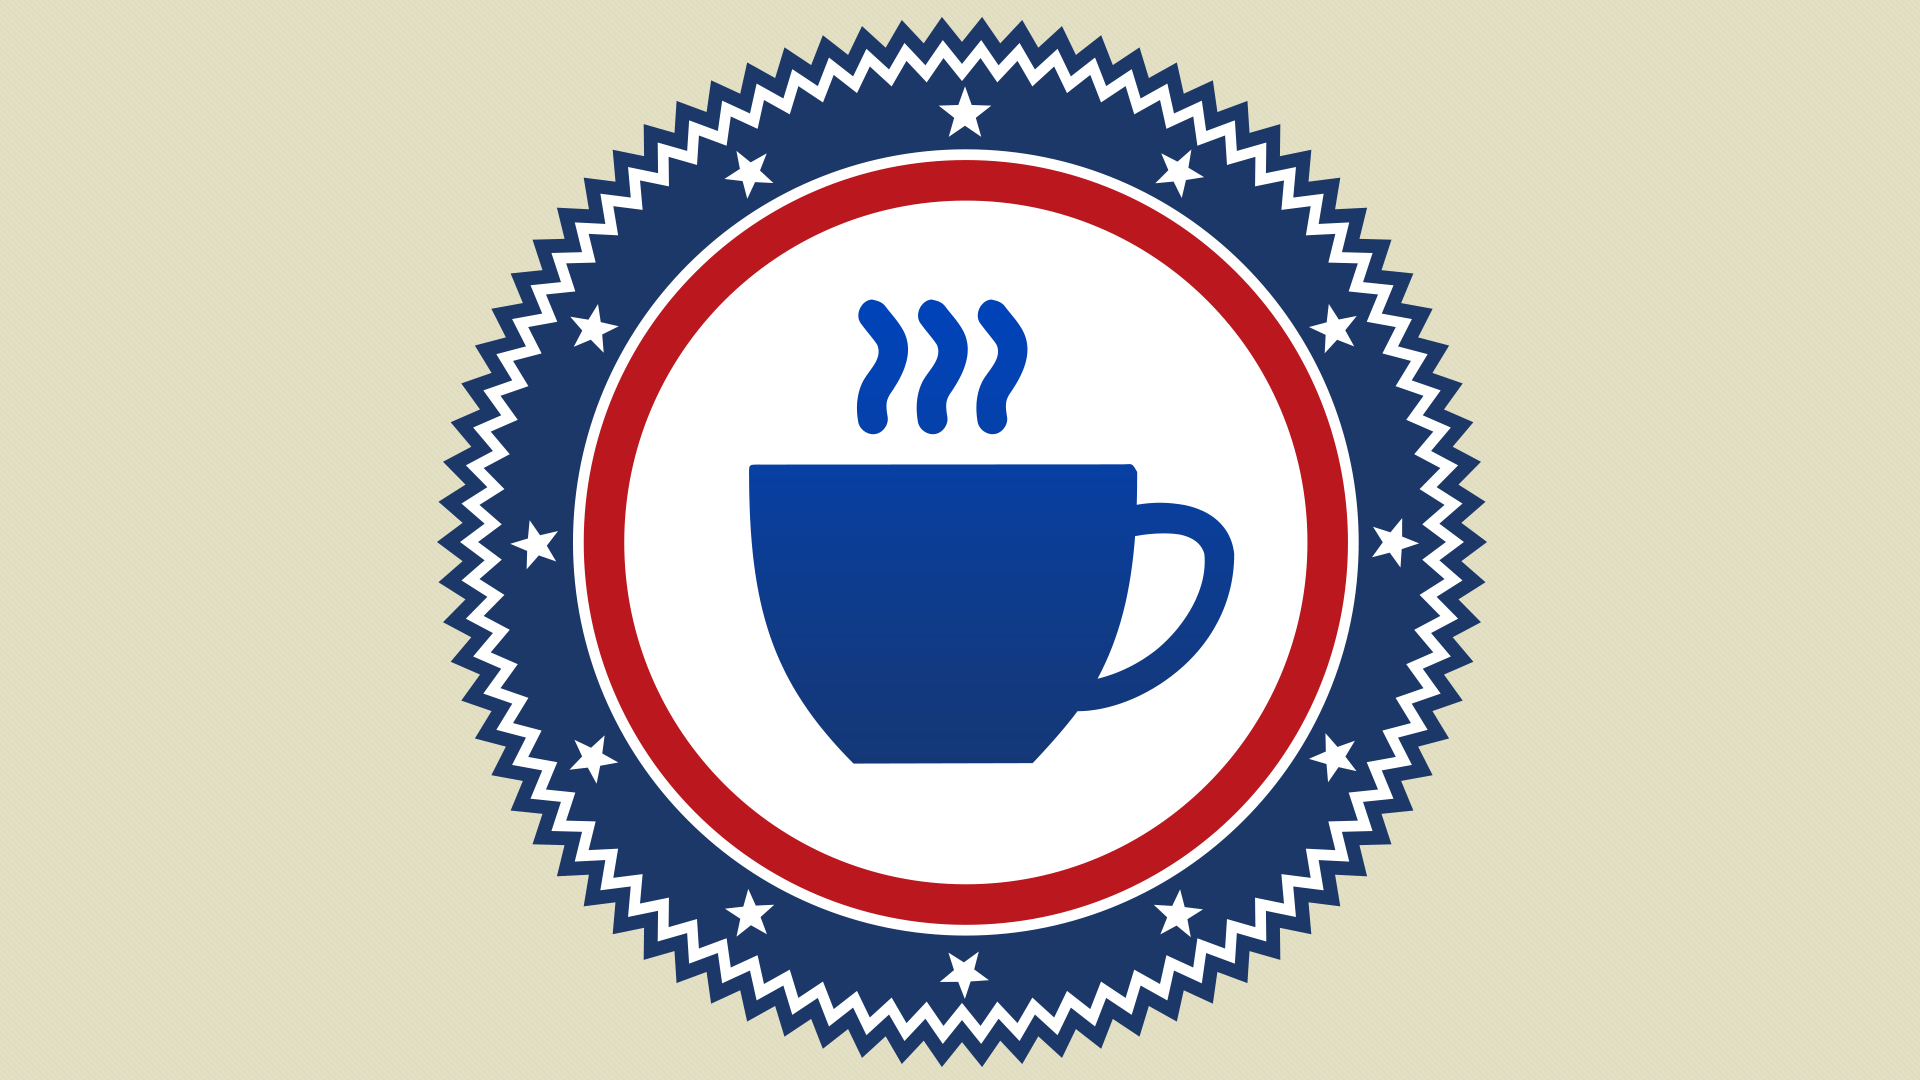 Icon for Coffee aroma